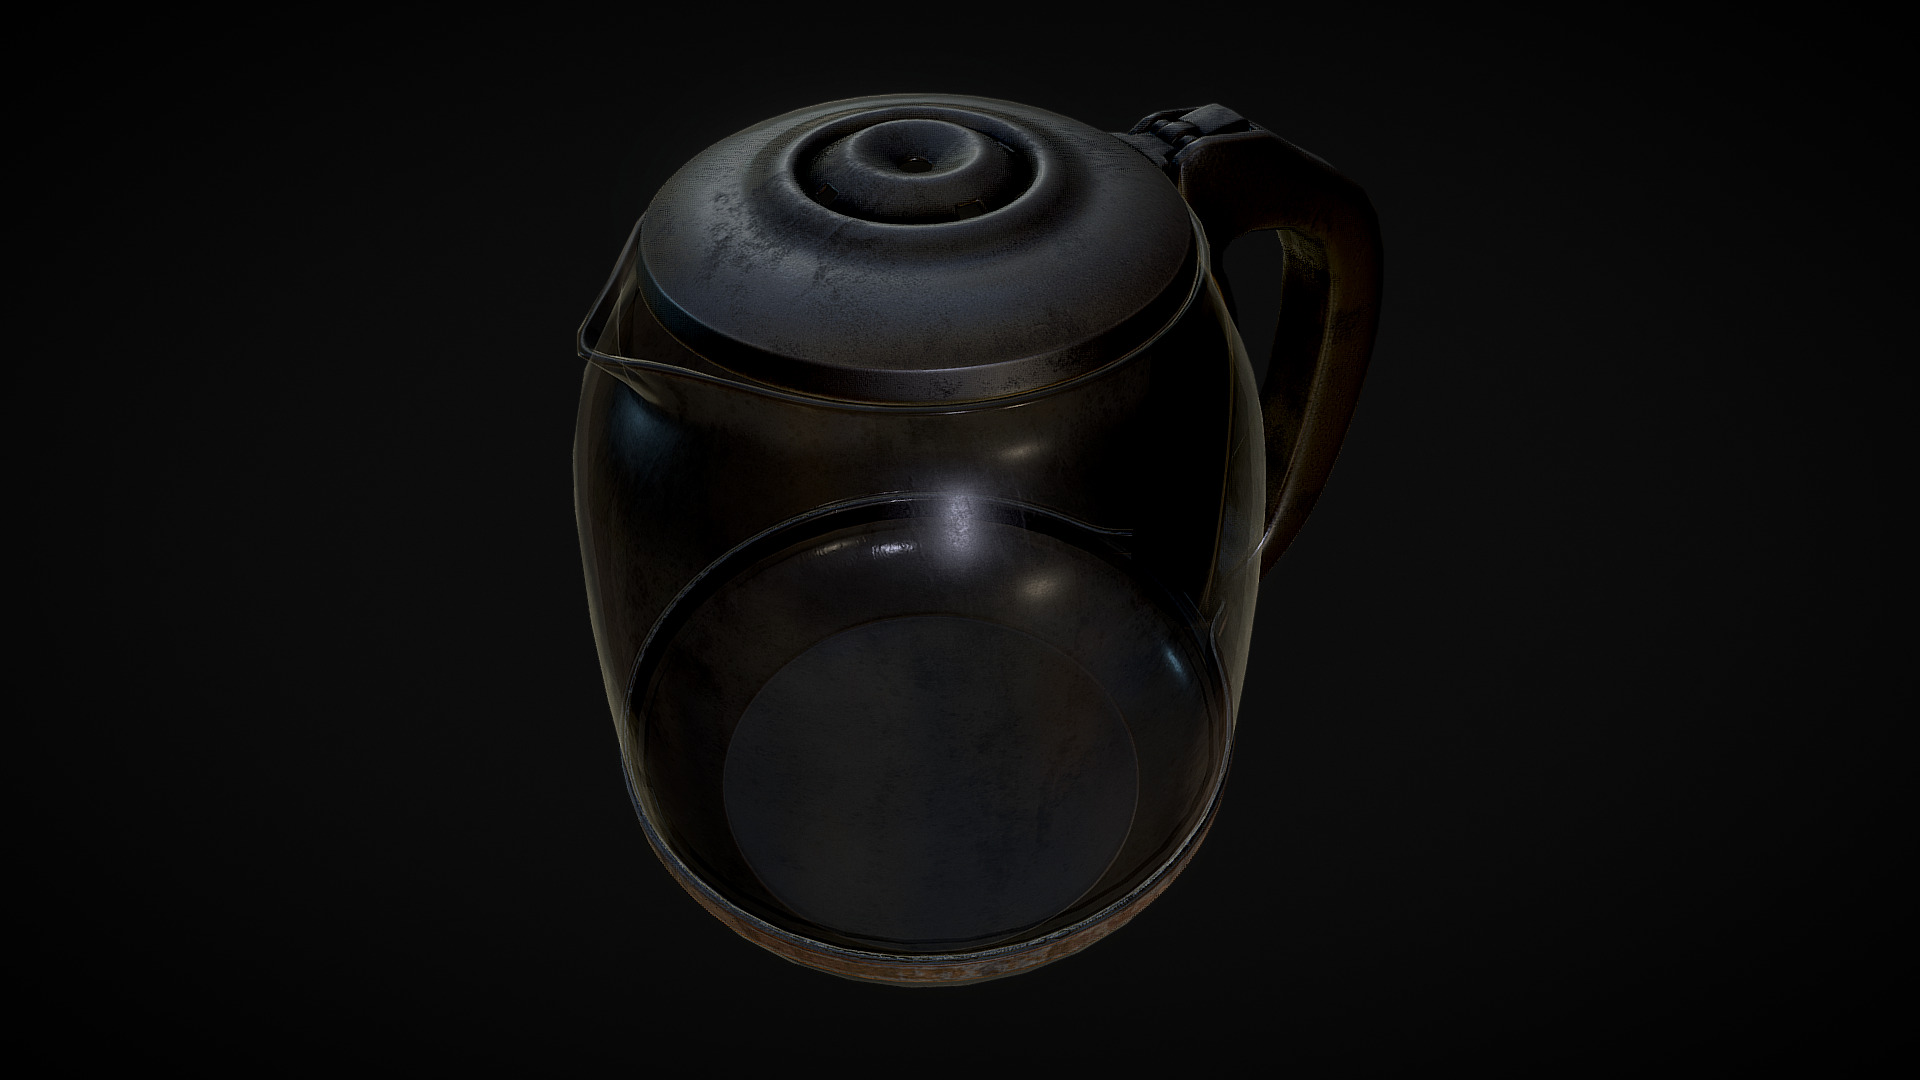 3D model Coffee old dirty version - This is a 3D model of the Coffee old dirty version. The 3D model is about a black teapot with a handle.